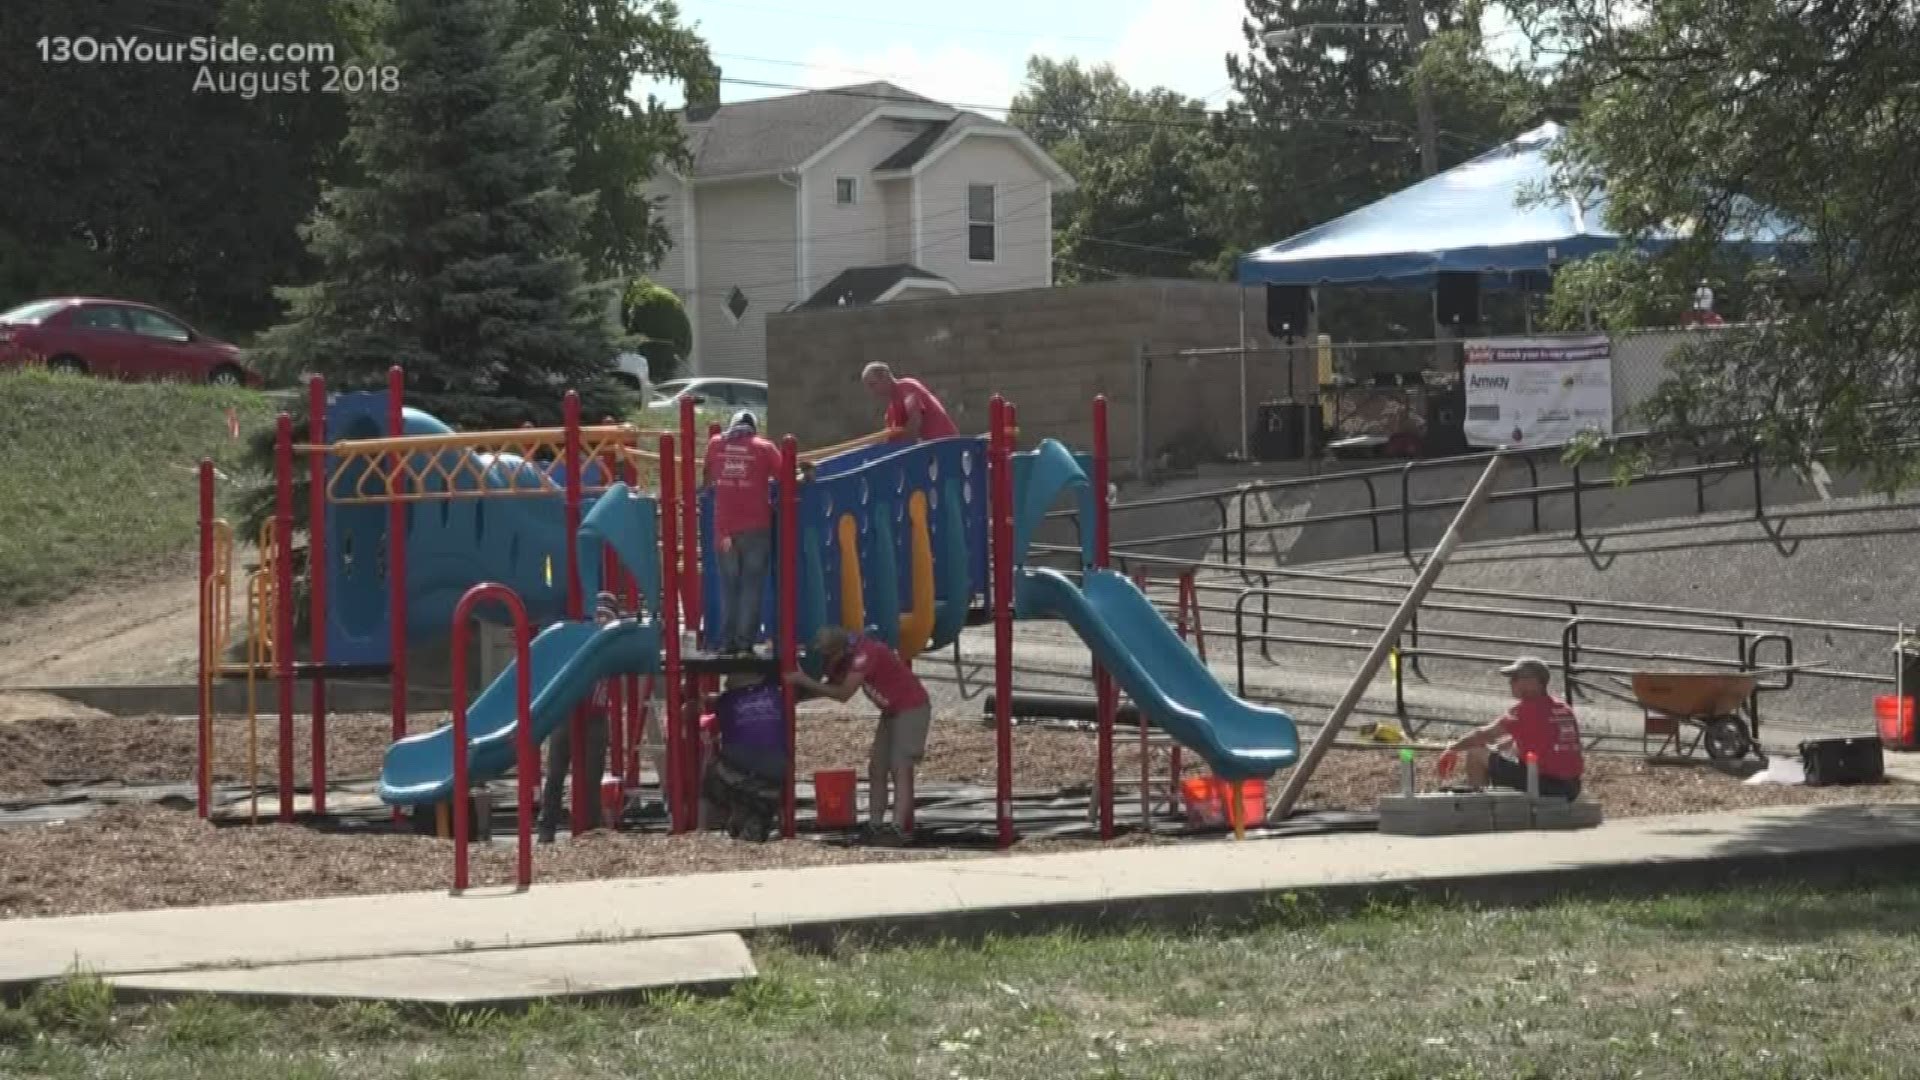 About 200 community volunteers are working Friday to build a new playground in Caulifield Park in Grand Rapids. The volunteers are from Amway, the City and Friends of Grand Rapids Parks all partnered up with KaBOOM! to upgrade the outdated park.